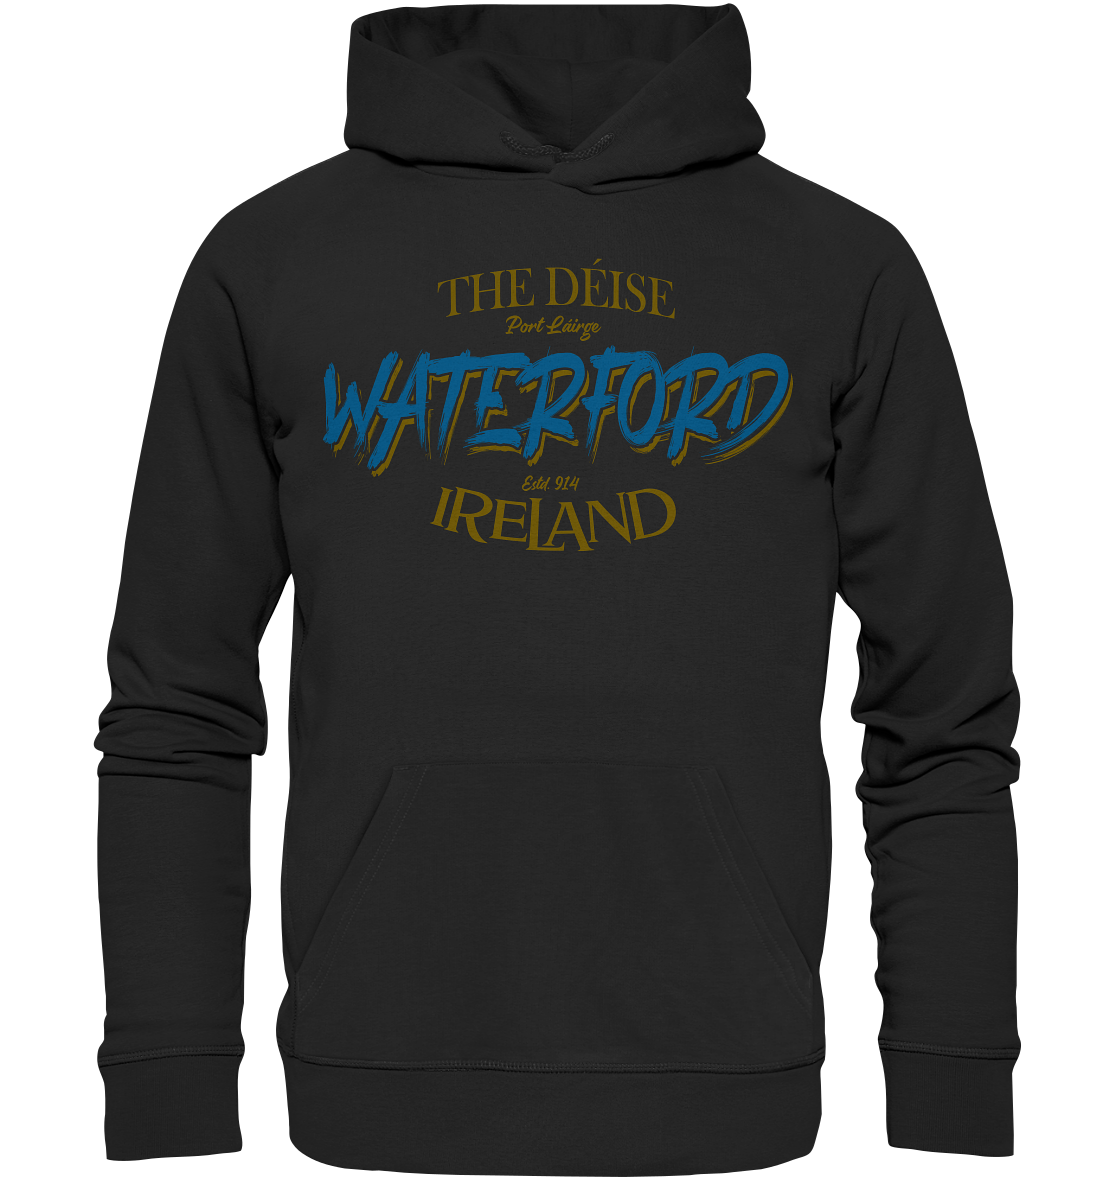 Waterford "The Déise" - Premium Unisex Hoodie